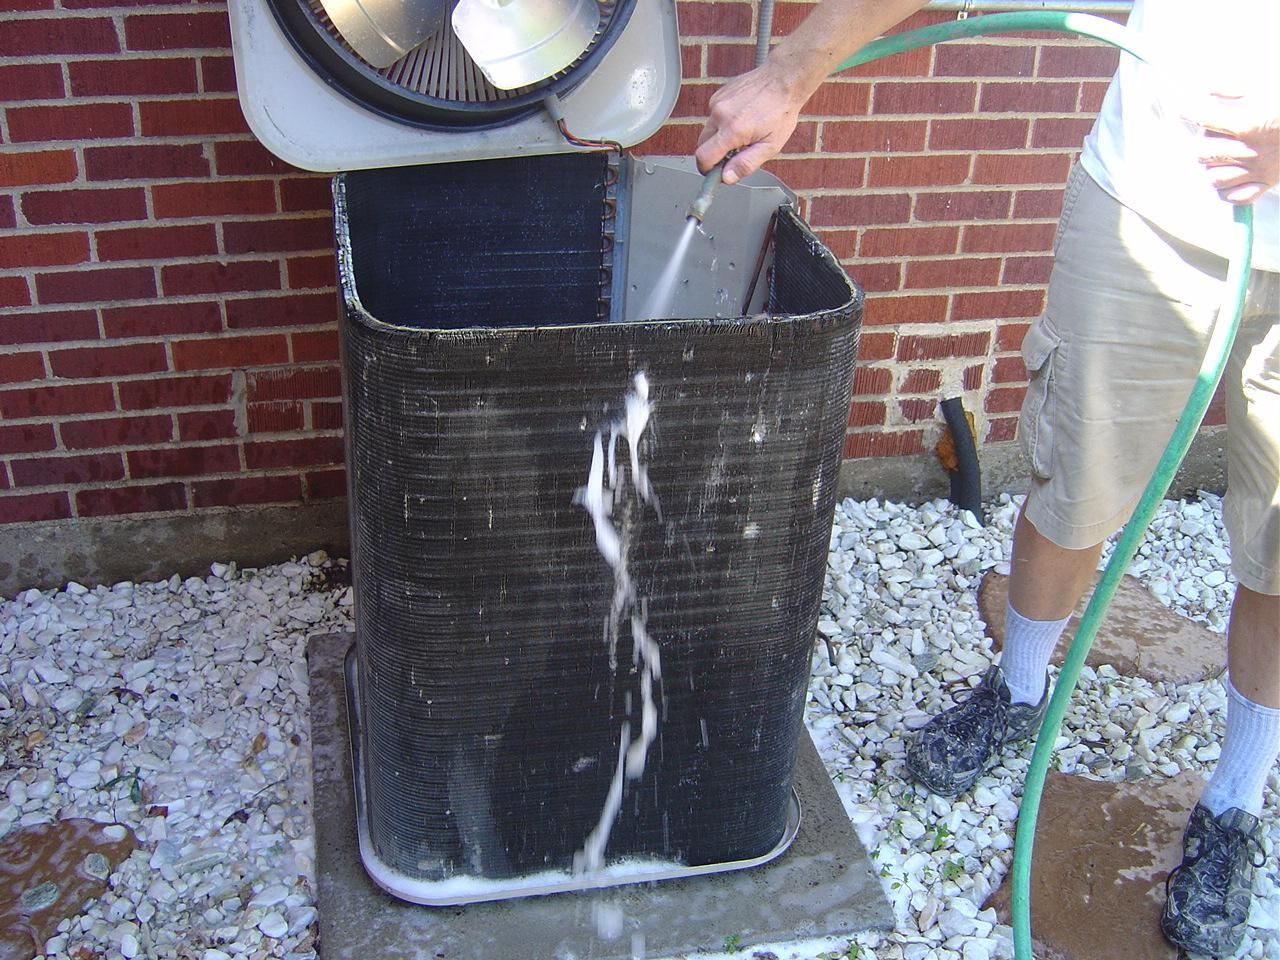 Cleaning an AC Unit with coil cleaner and rinsing it with water from a hose. Maintenance Visit from John's Heating, Cooling, and Appliance Repair